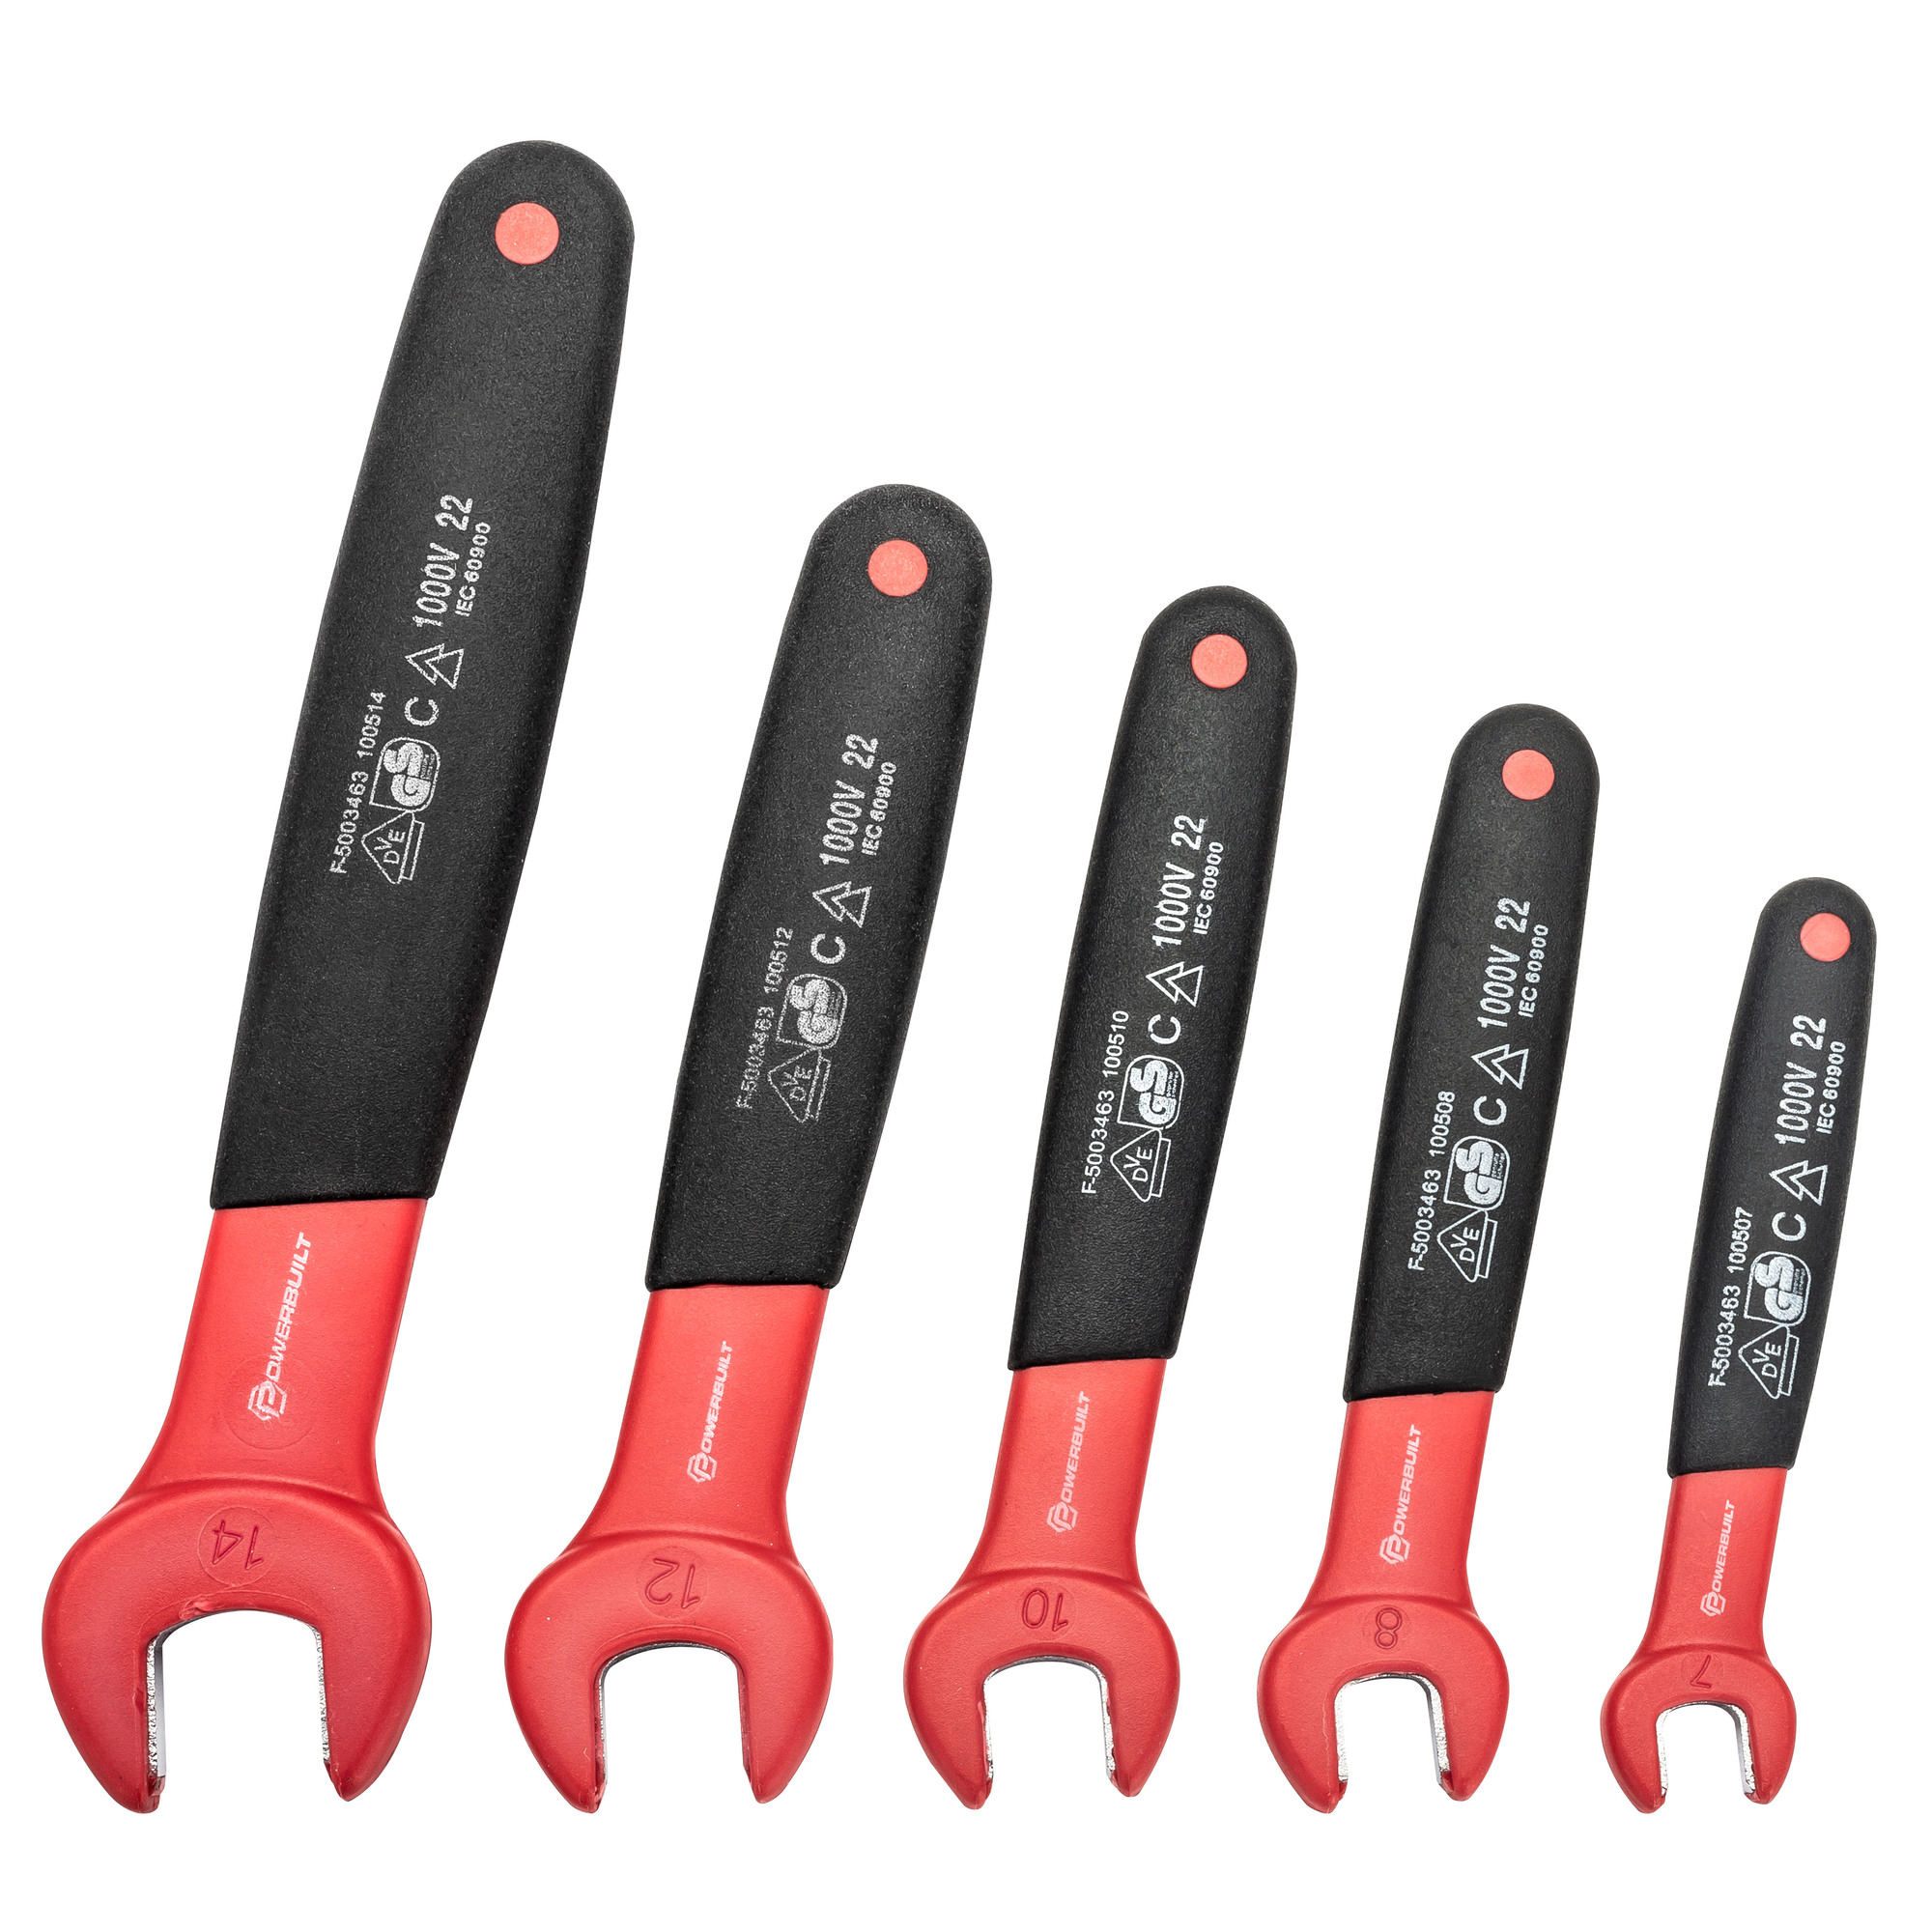 Powerbuilt, 5 Piece Insulated VDE Open End Wrench Set (Metric), Pieces (qty.) 5 Model 642961